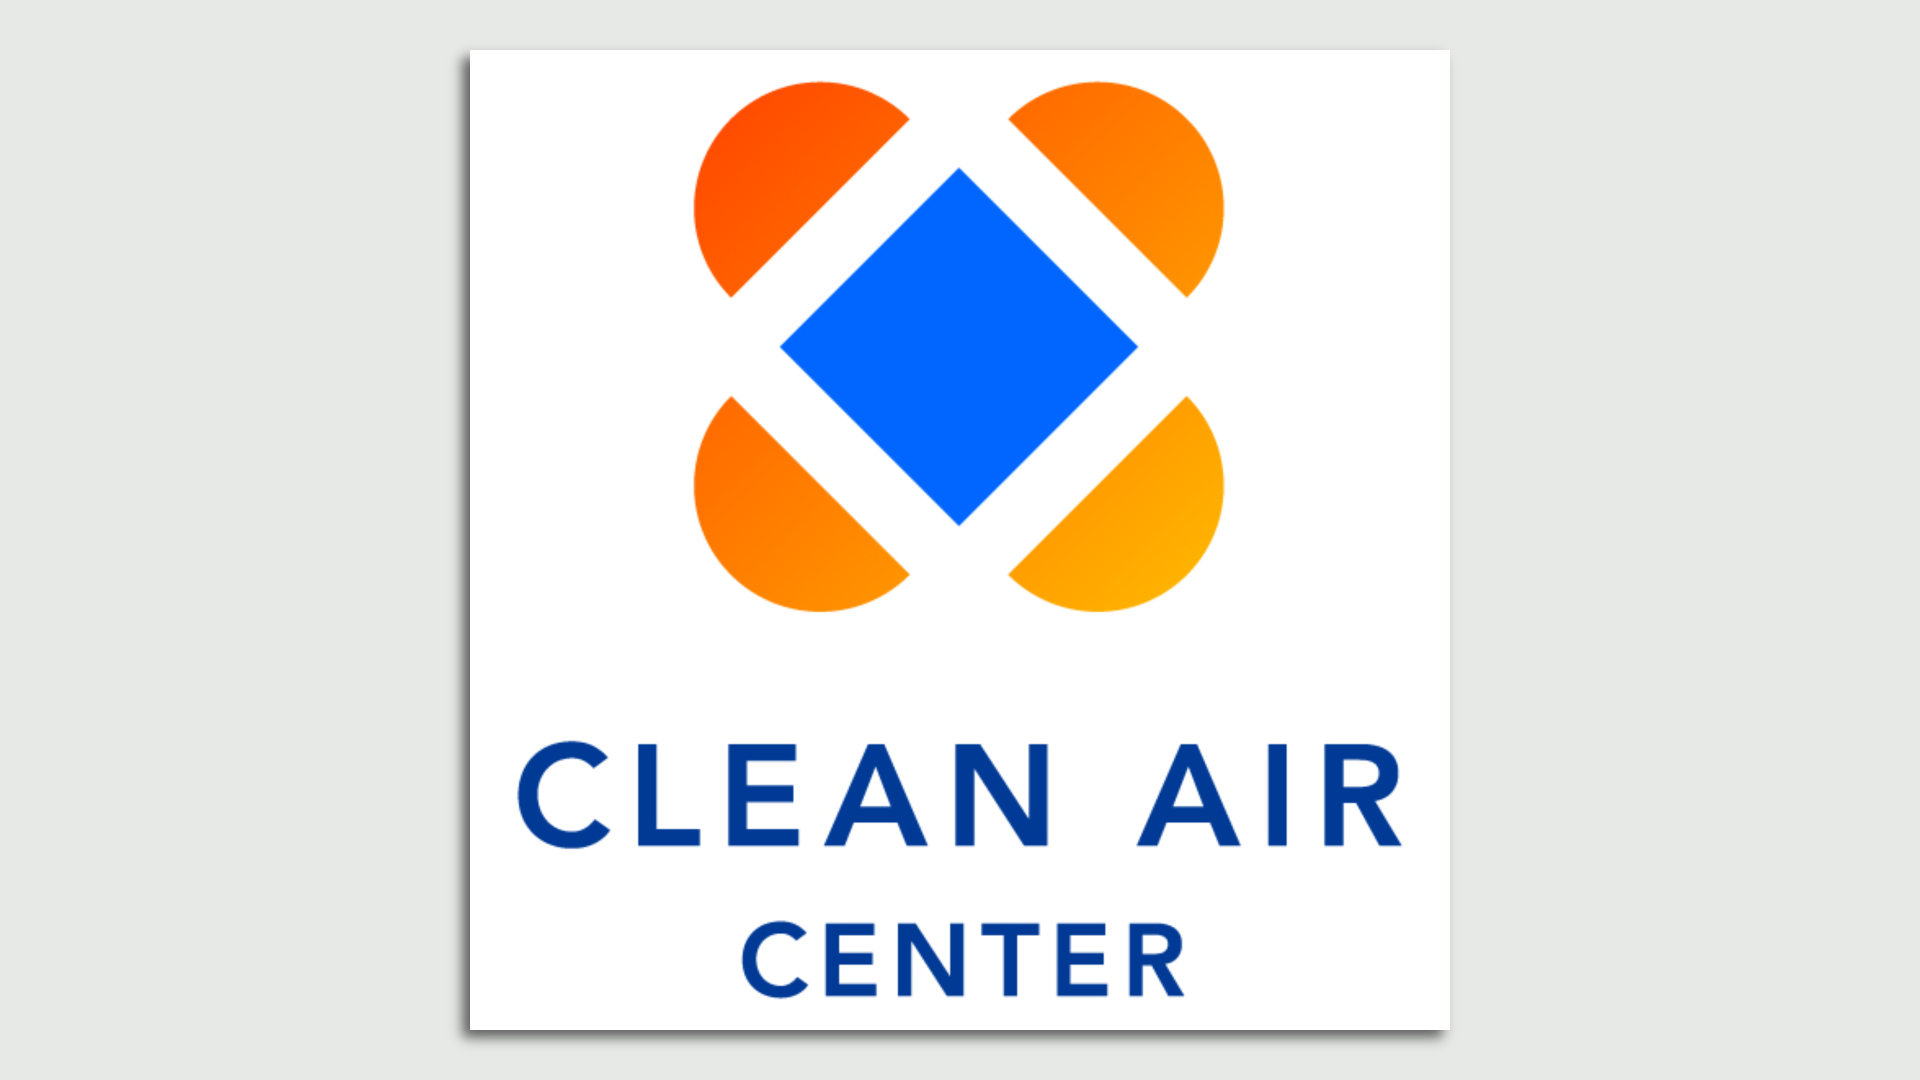 A logo created to identify Clean Air Centers in California.